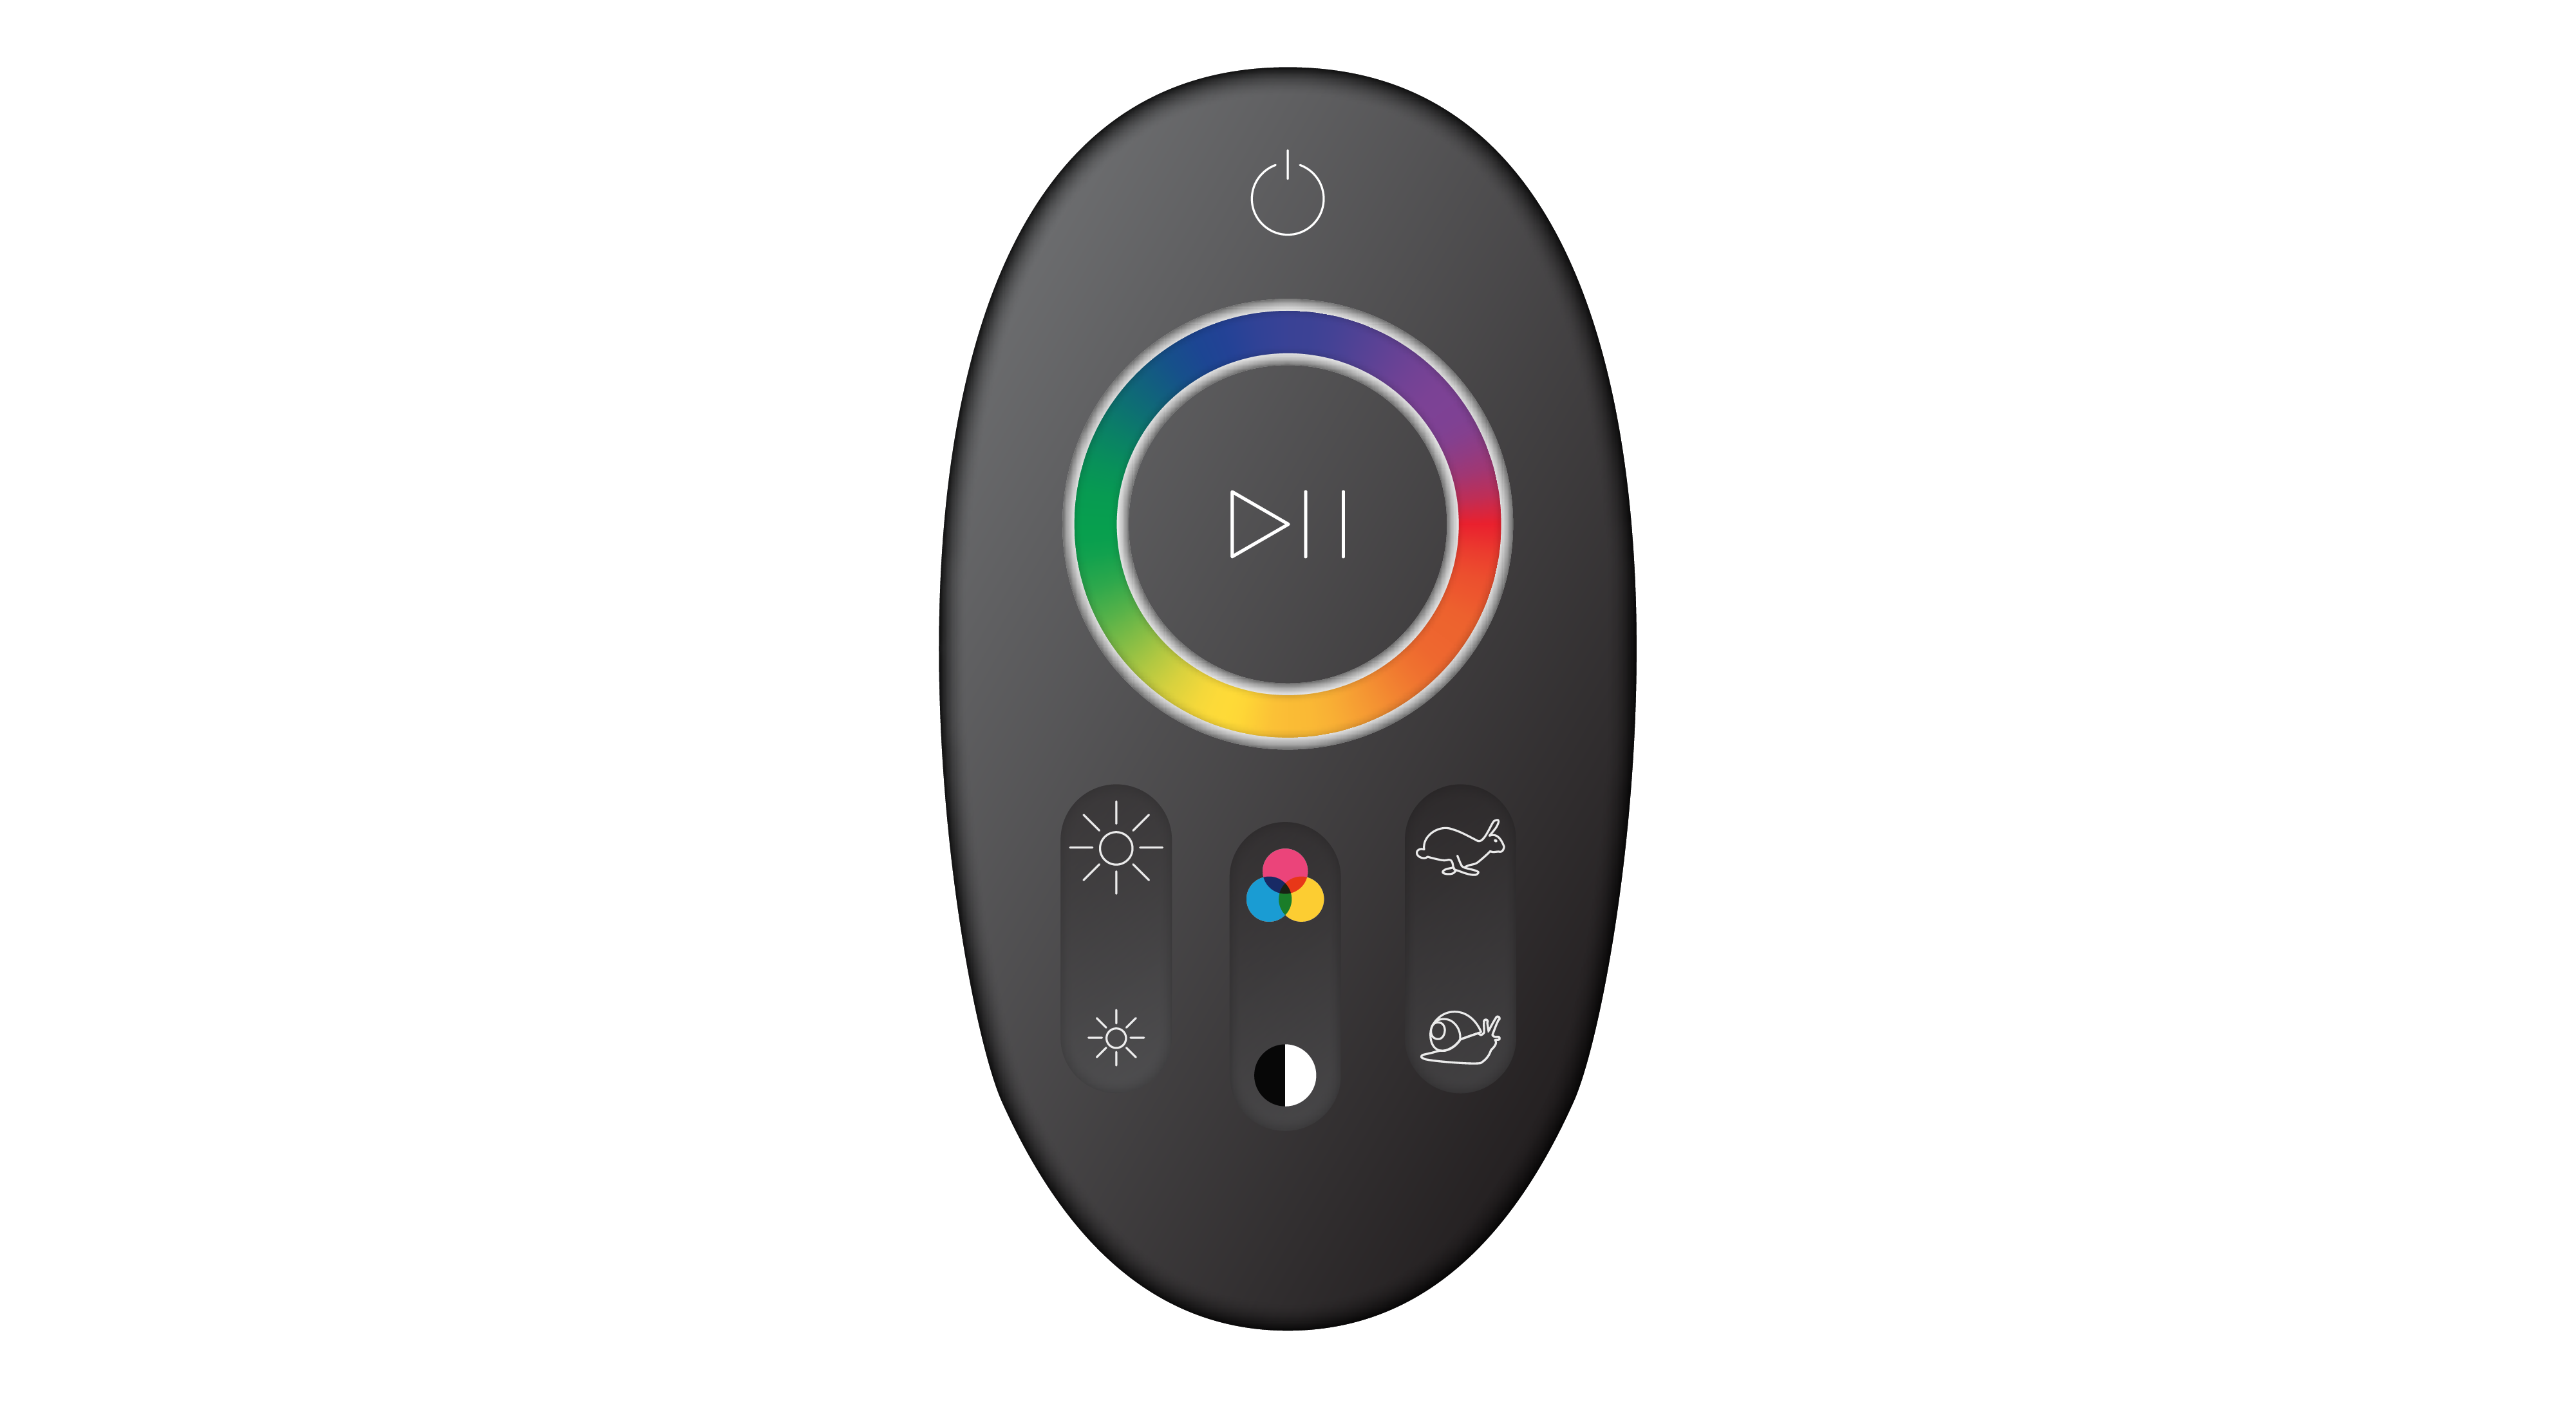 A remote with various stickers and buttons.